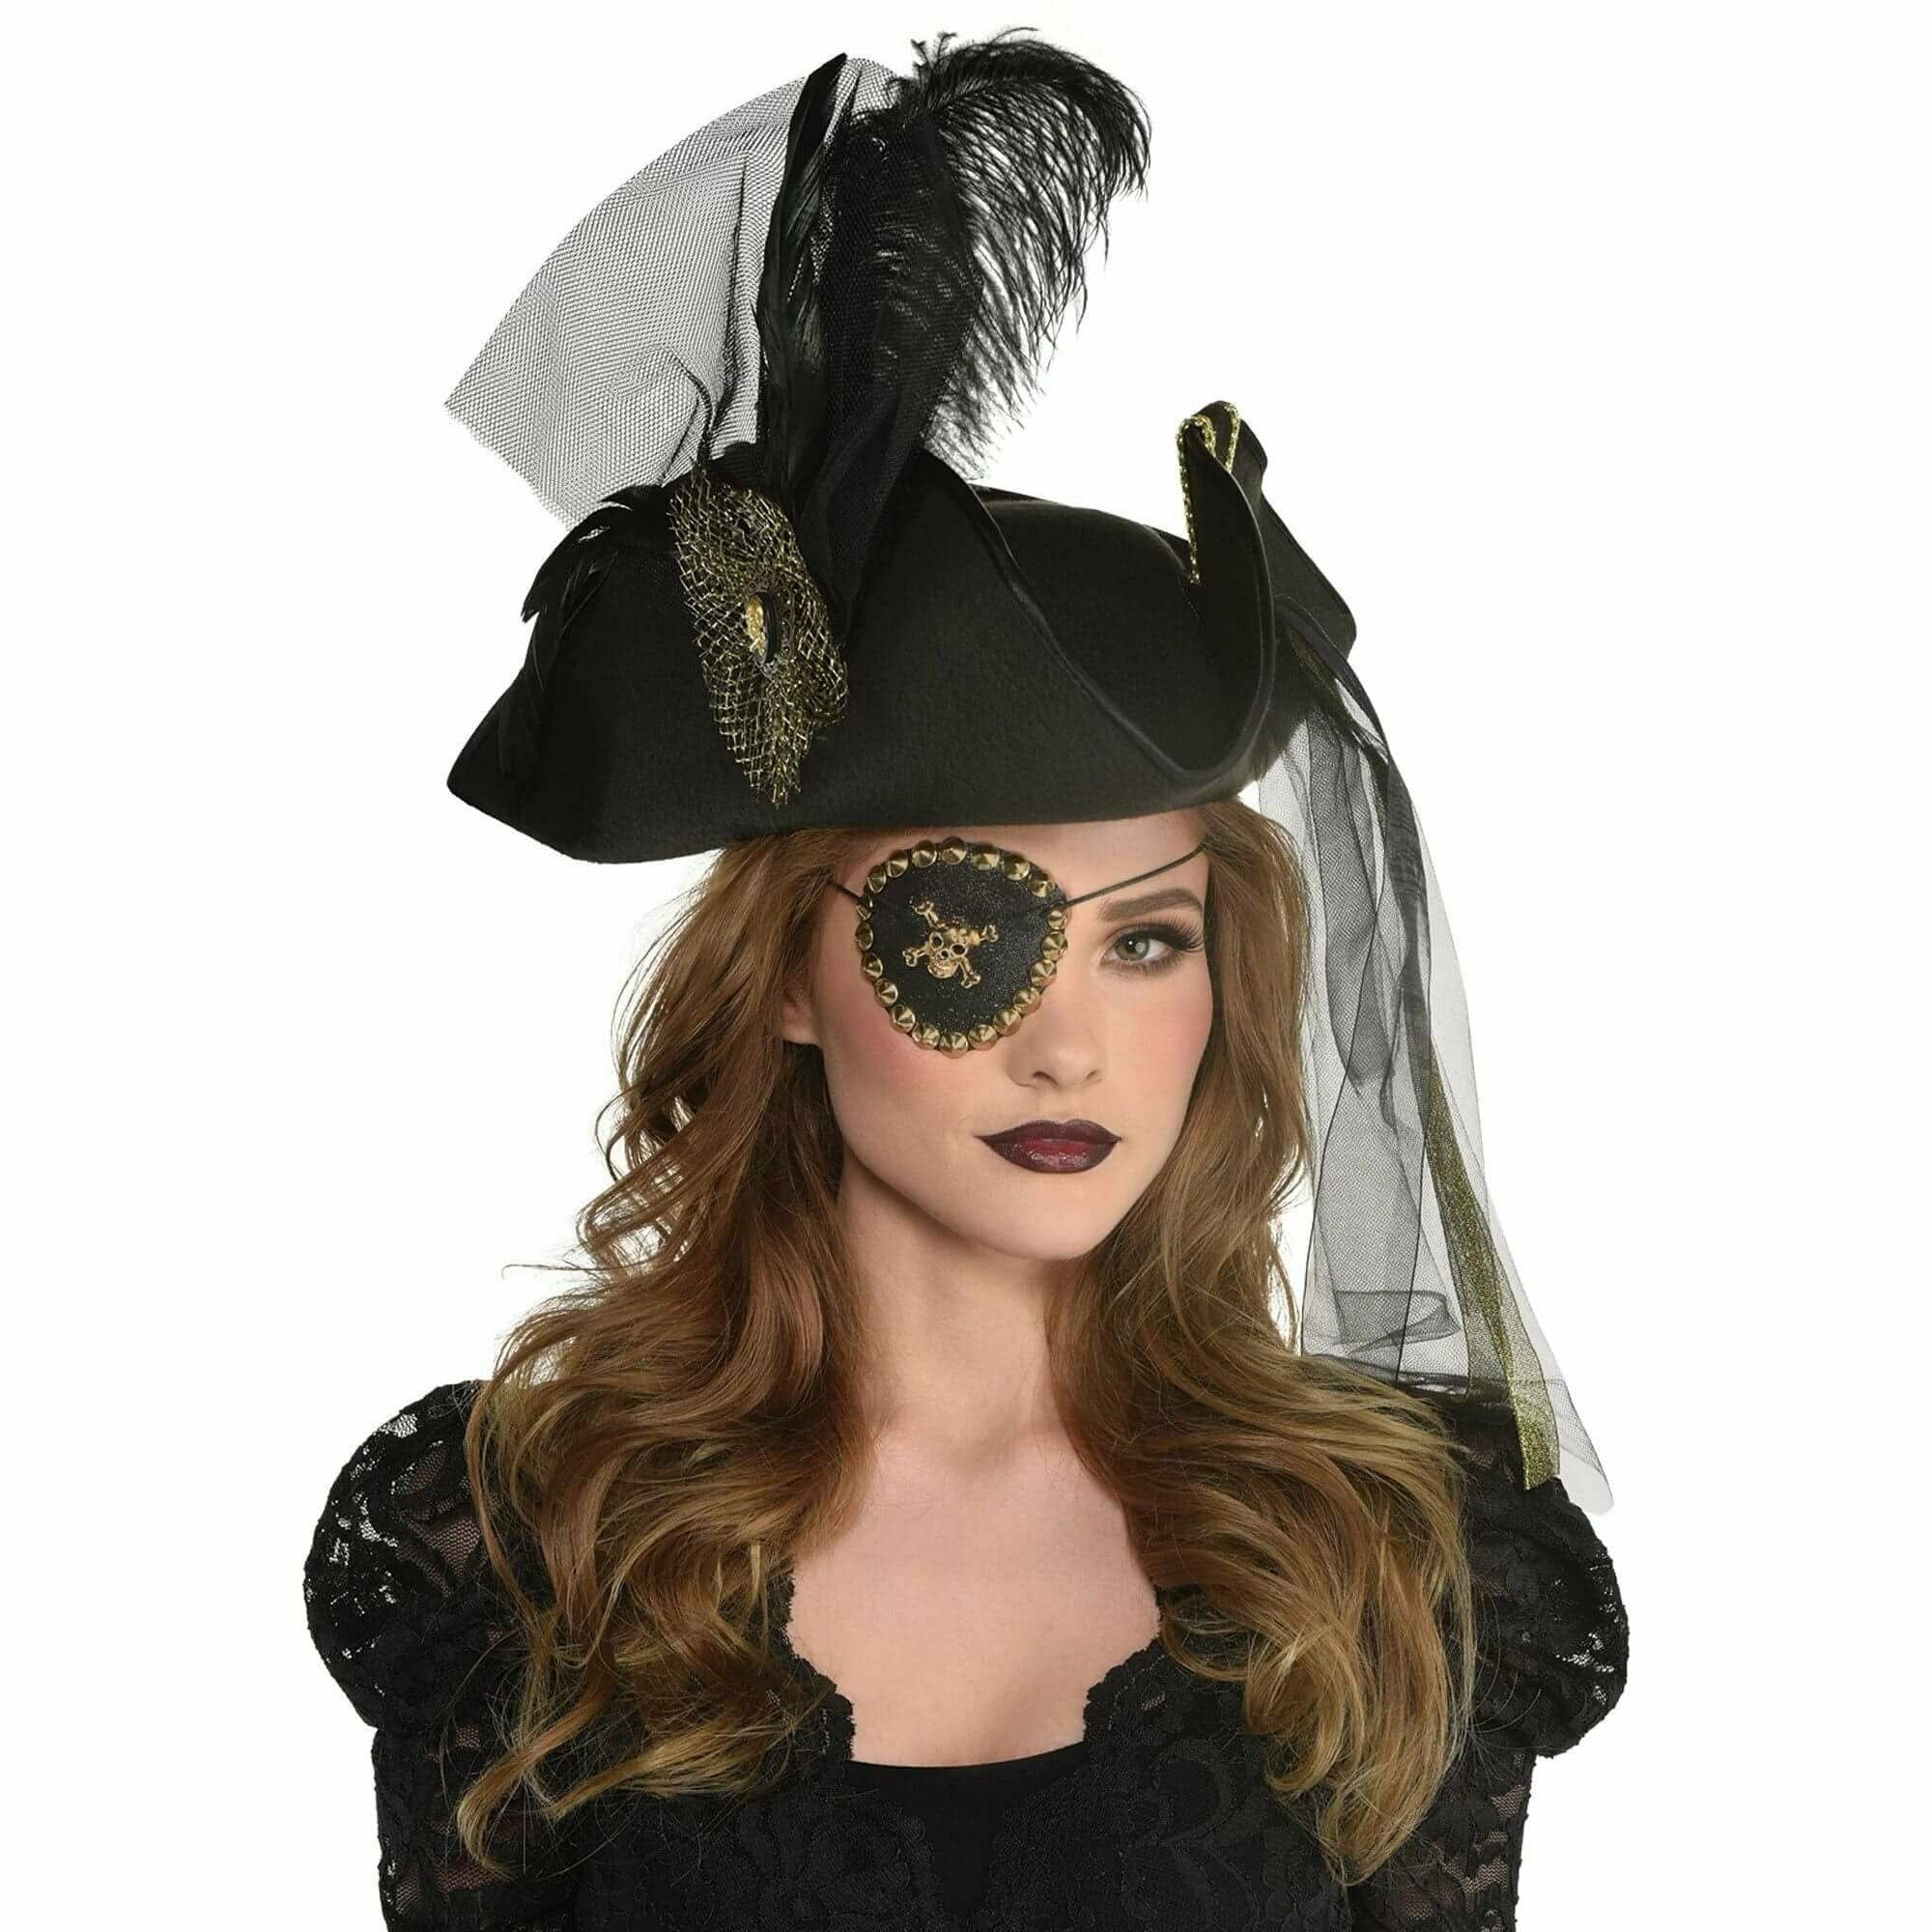 Amscan COSTUMES: ACCESSORIES Skull Pirate Eye Patch